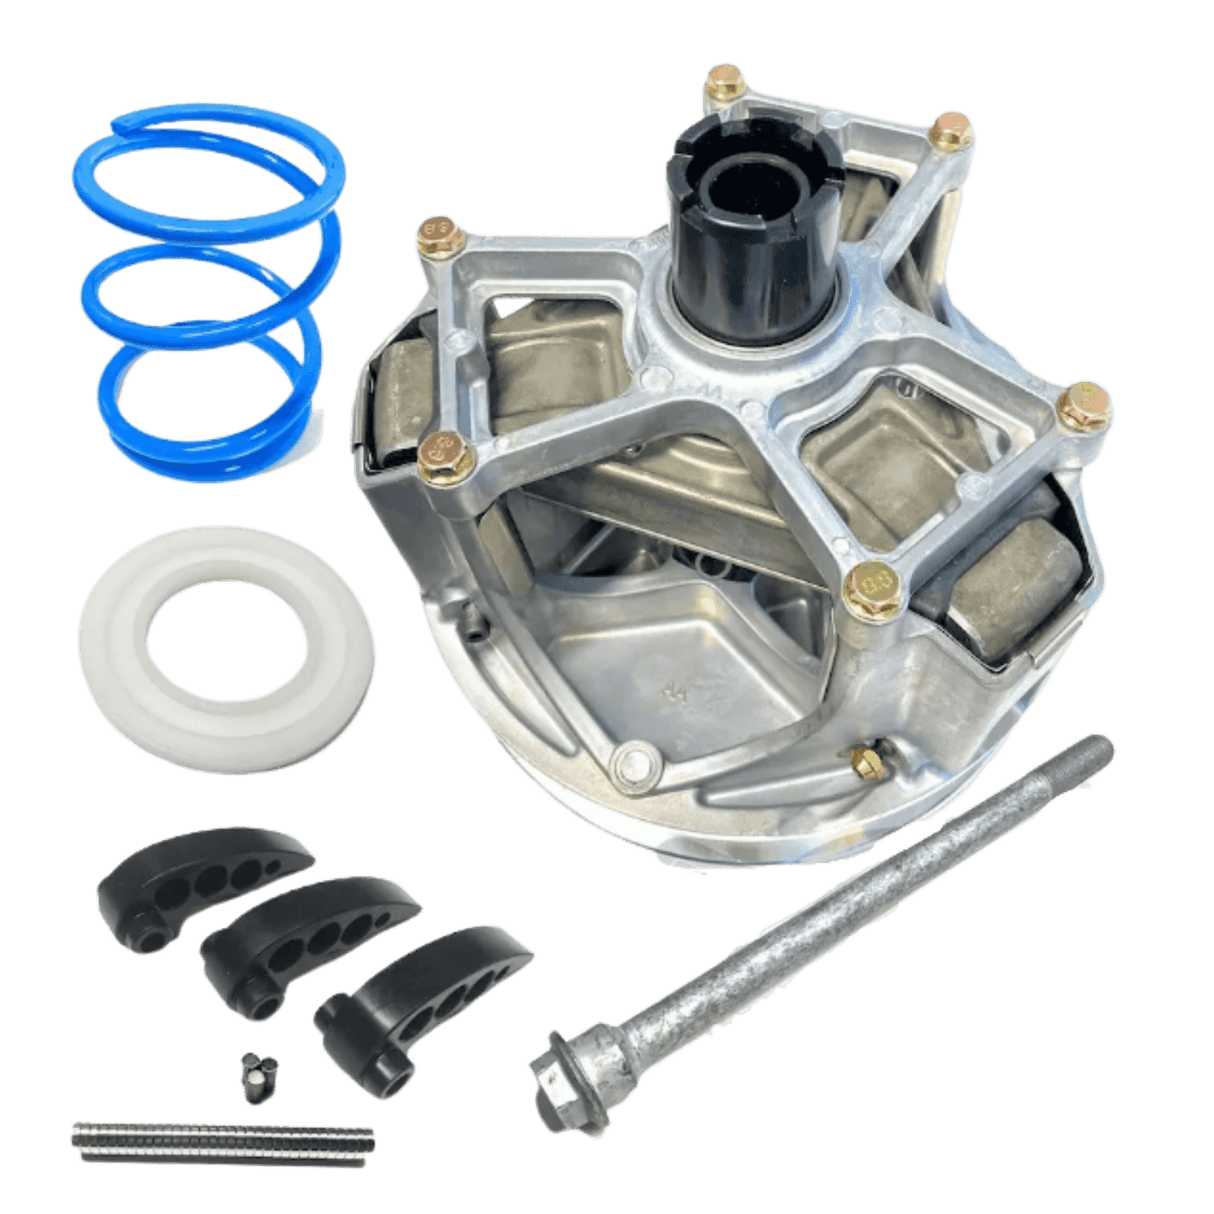 Polaris Ranger XP 1000 Double Cam stage 1 Clutch Kit with Heavy Duty Primary (2018+) - R1 Industries